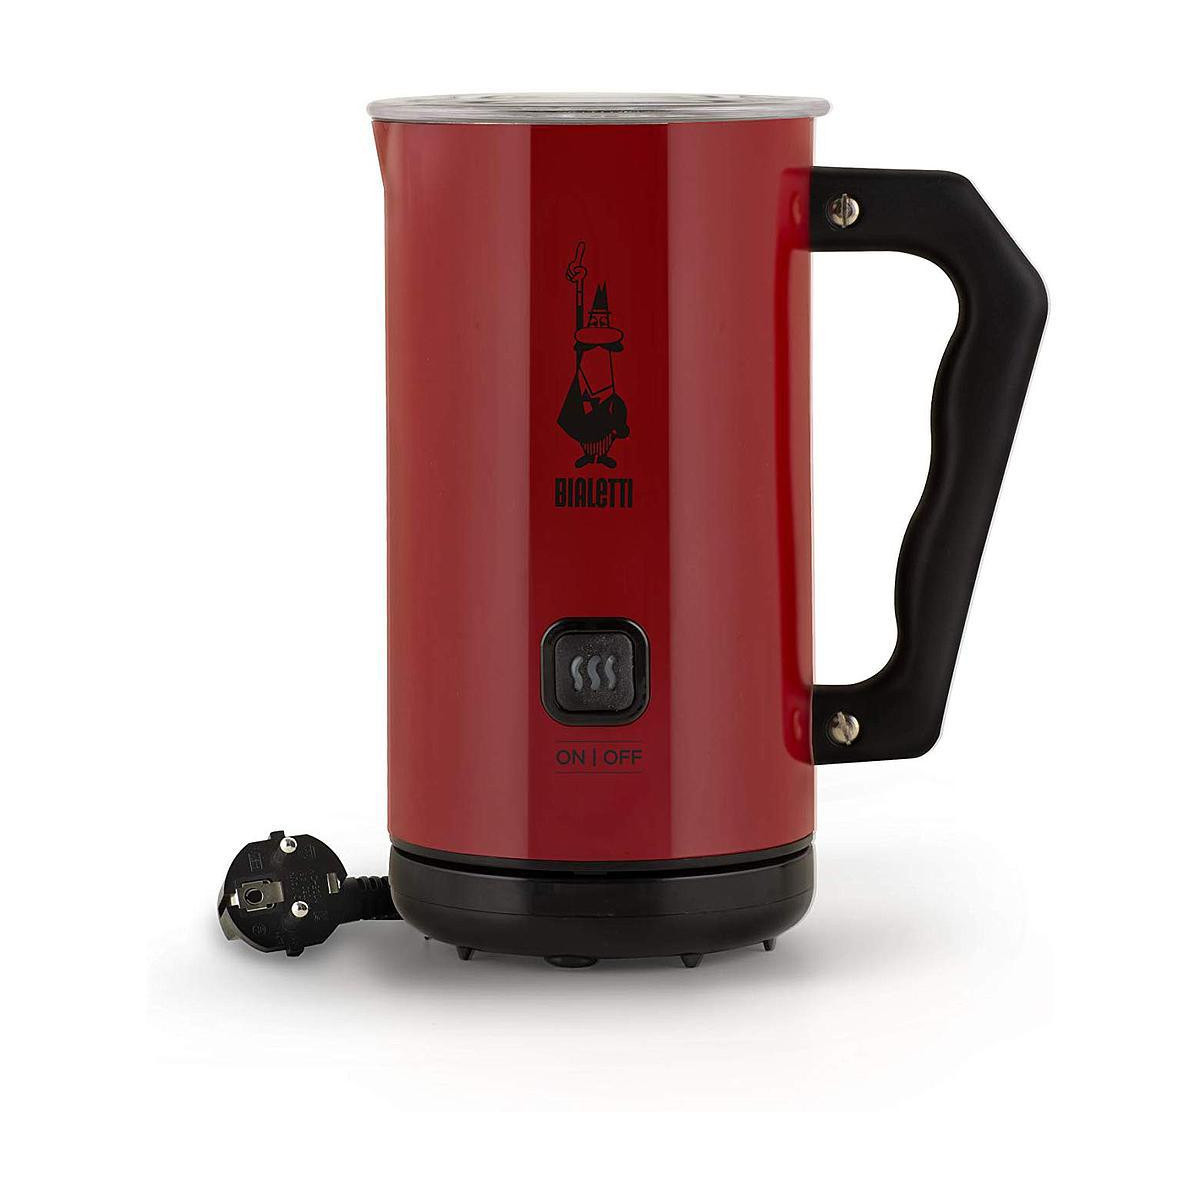 Bialetti Frother - Montalatte Elettrico, Rosso